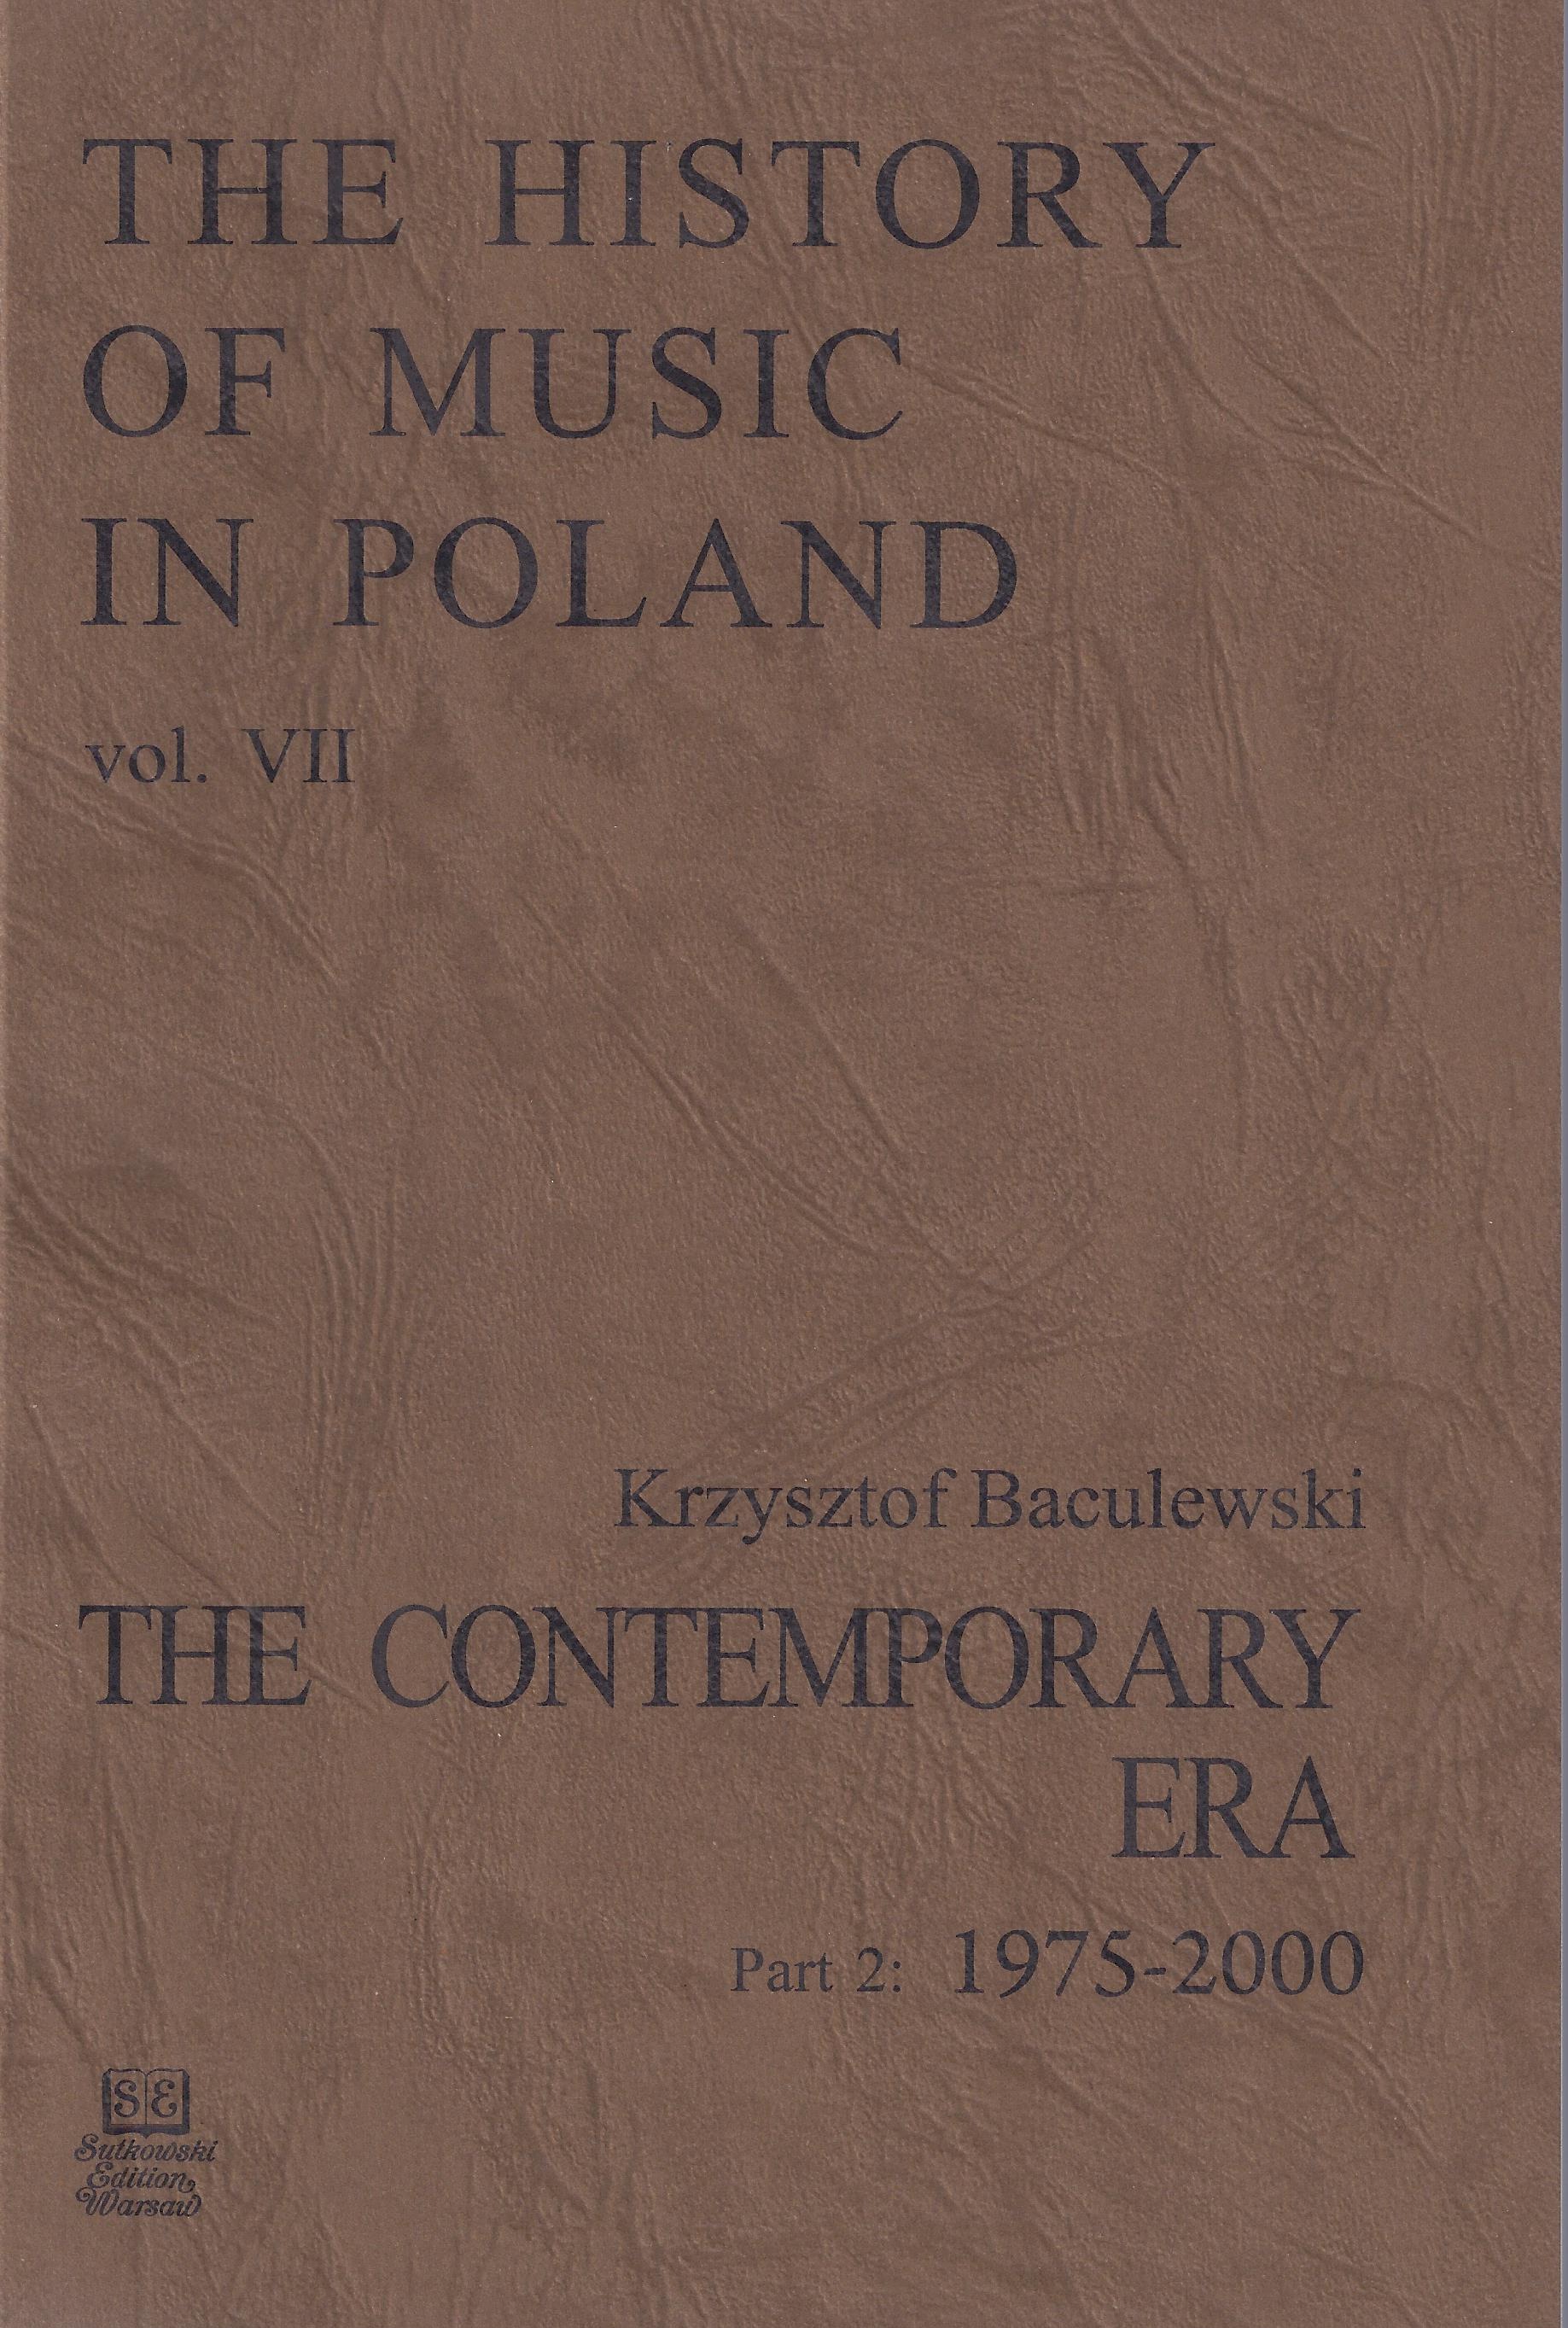 The History of Music in Poland vol VII Part 2 – The Contemporary Era (1975-2000)